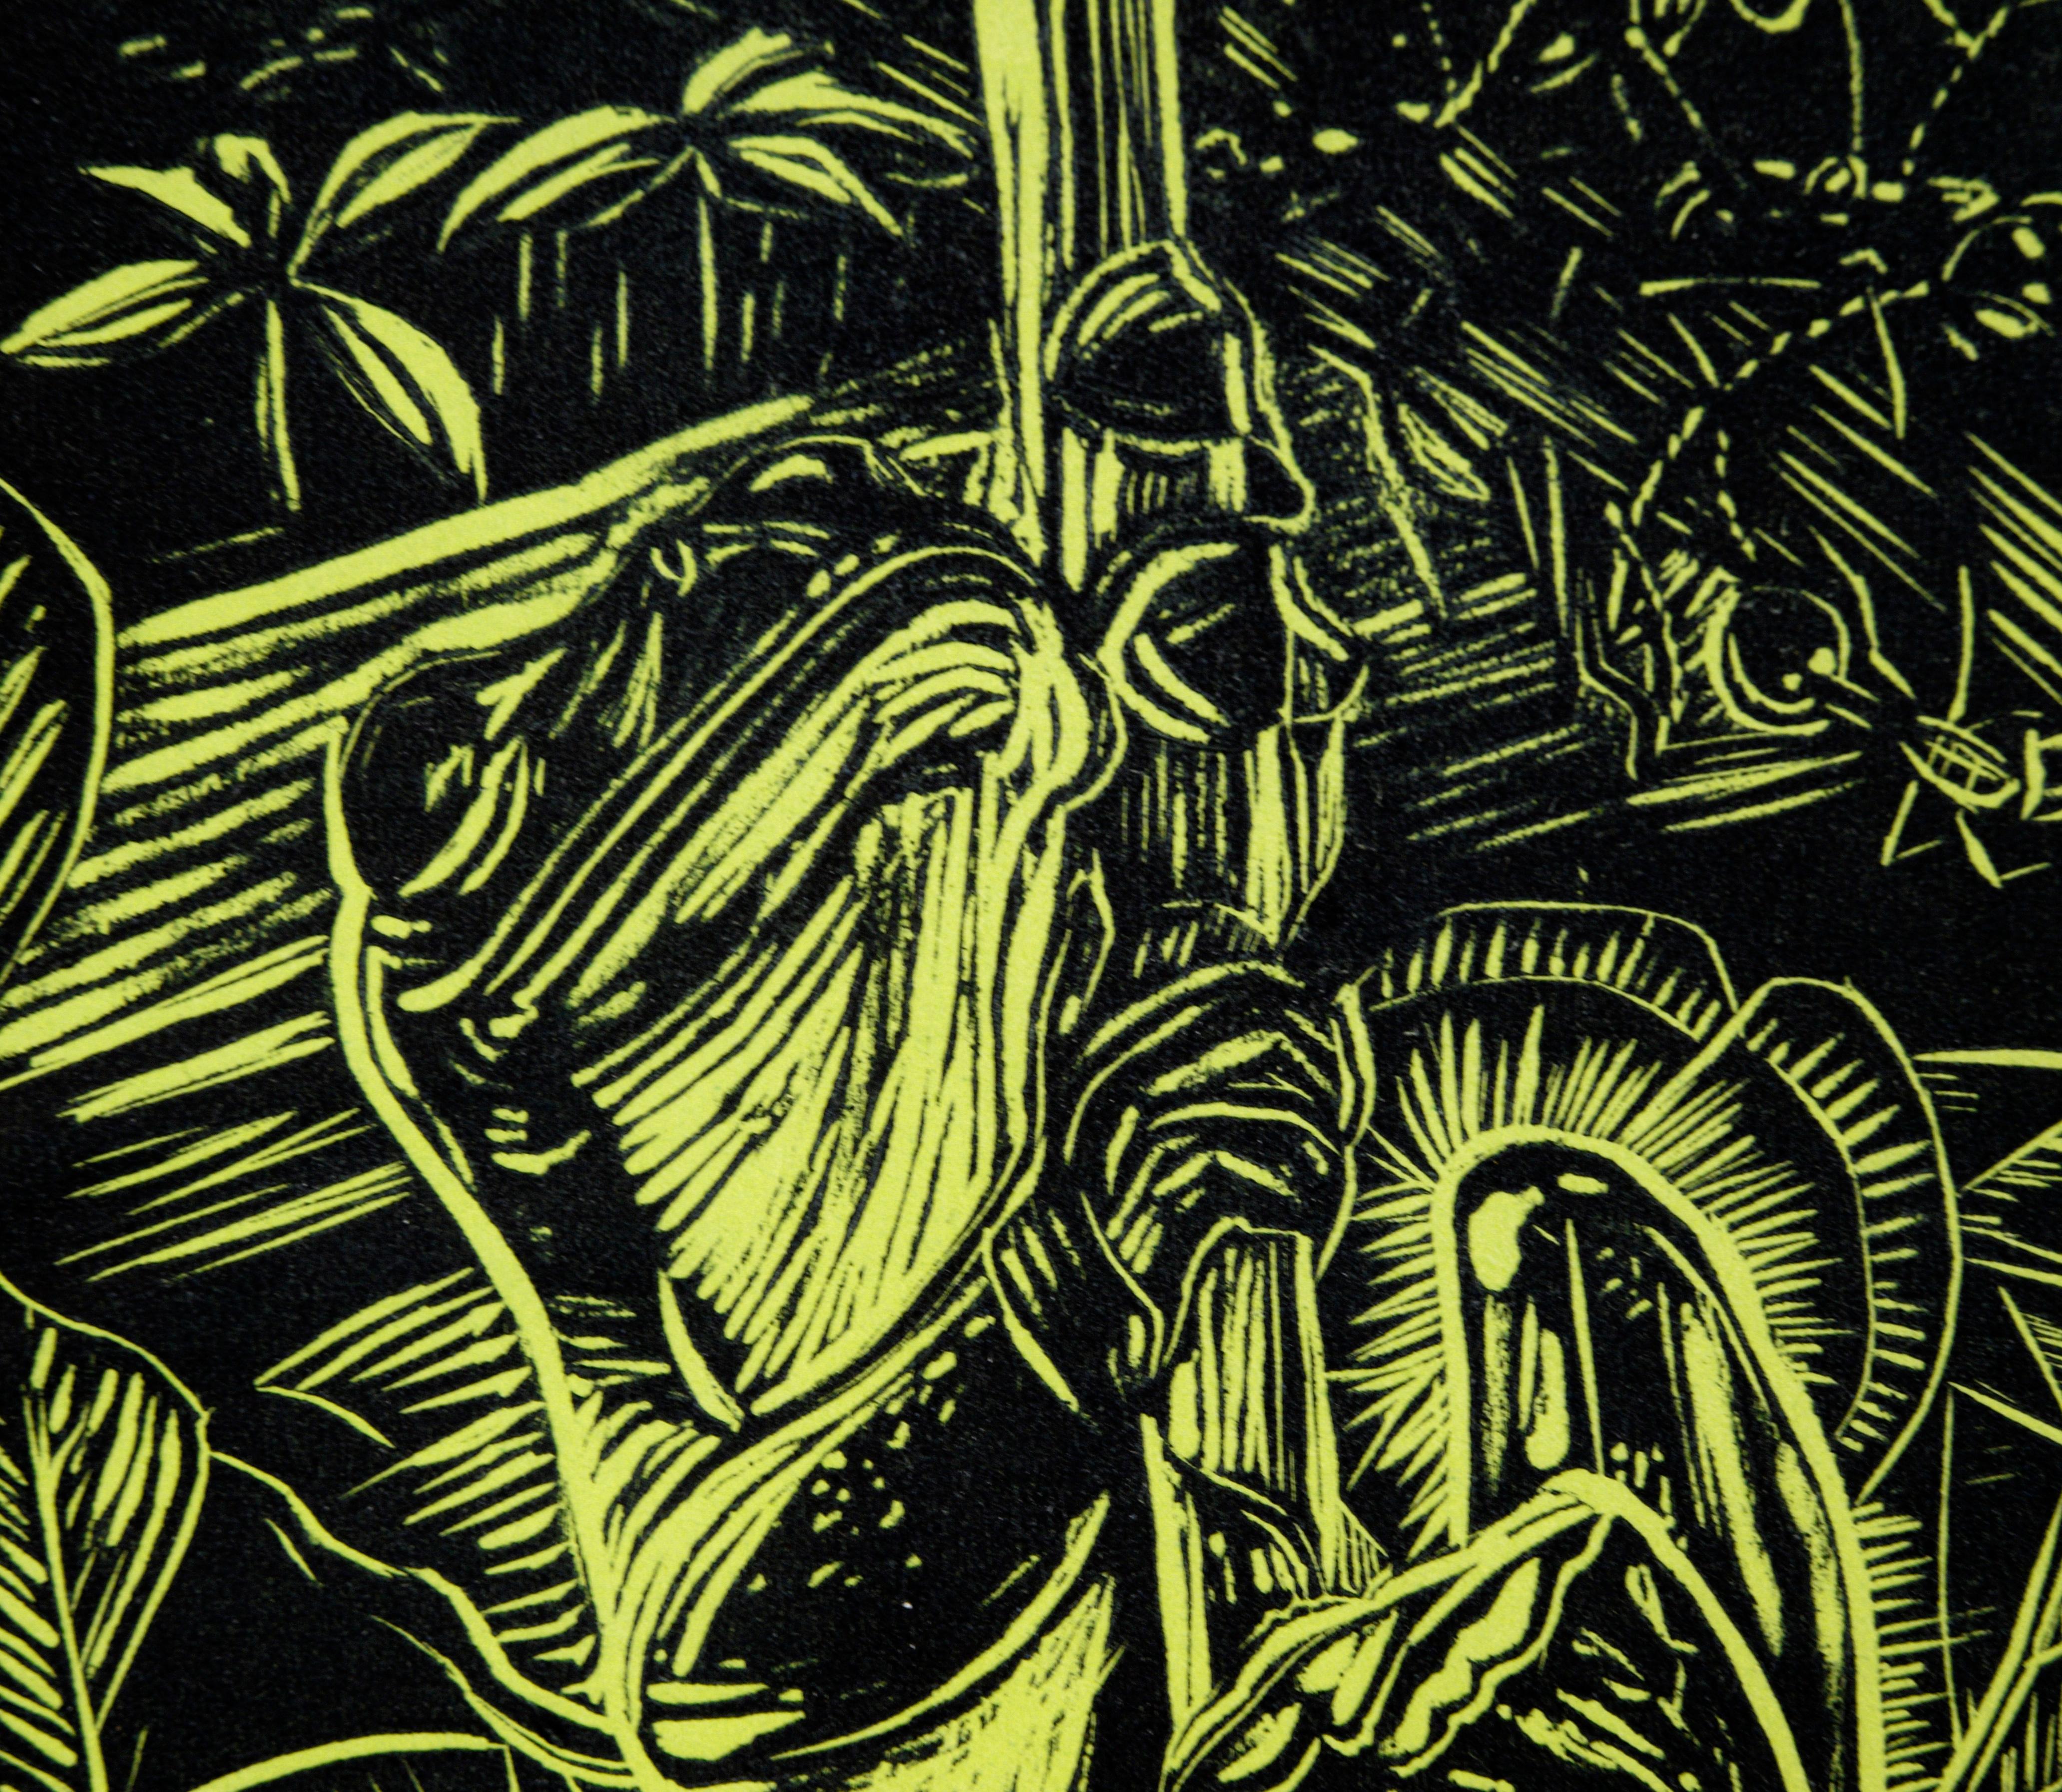 Frog on a Stalk in the Jungle - Linocut Print on Tissue Paper (proof) - Black Landscape Print by Unknown